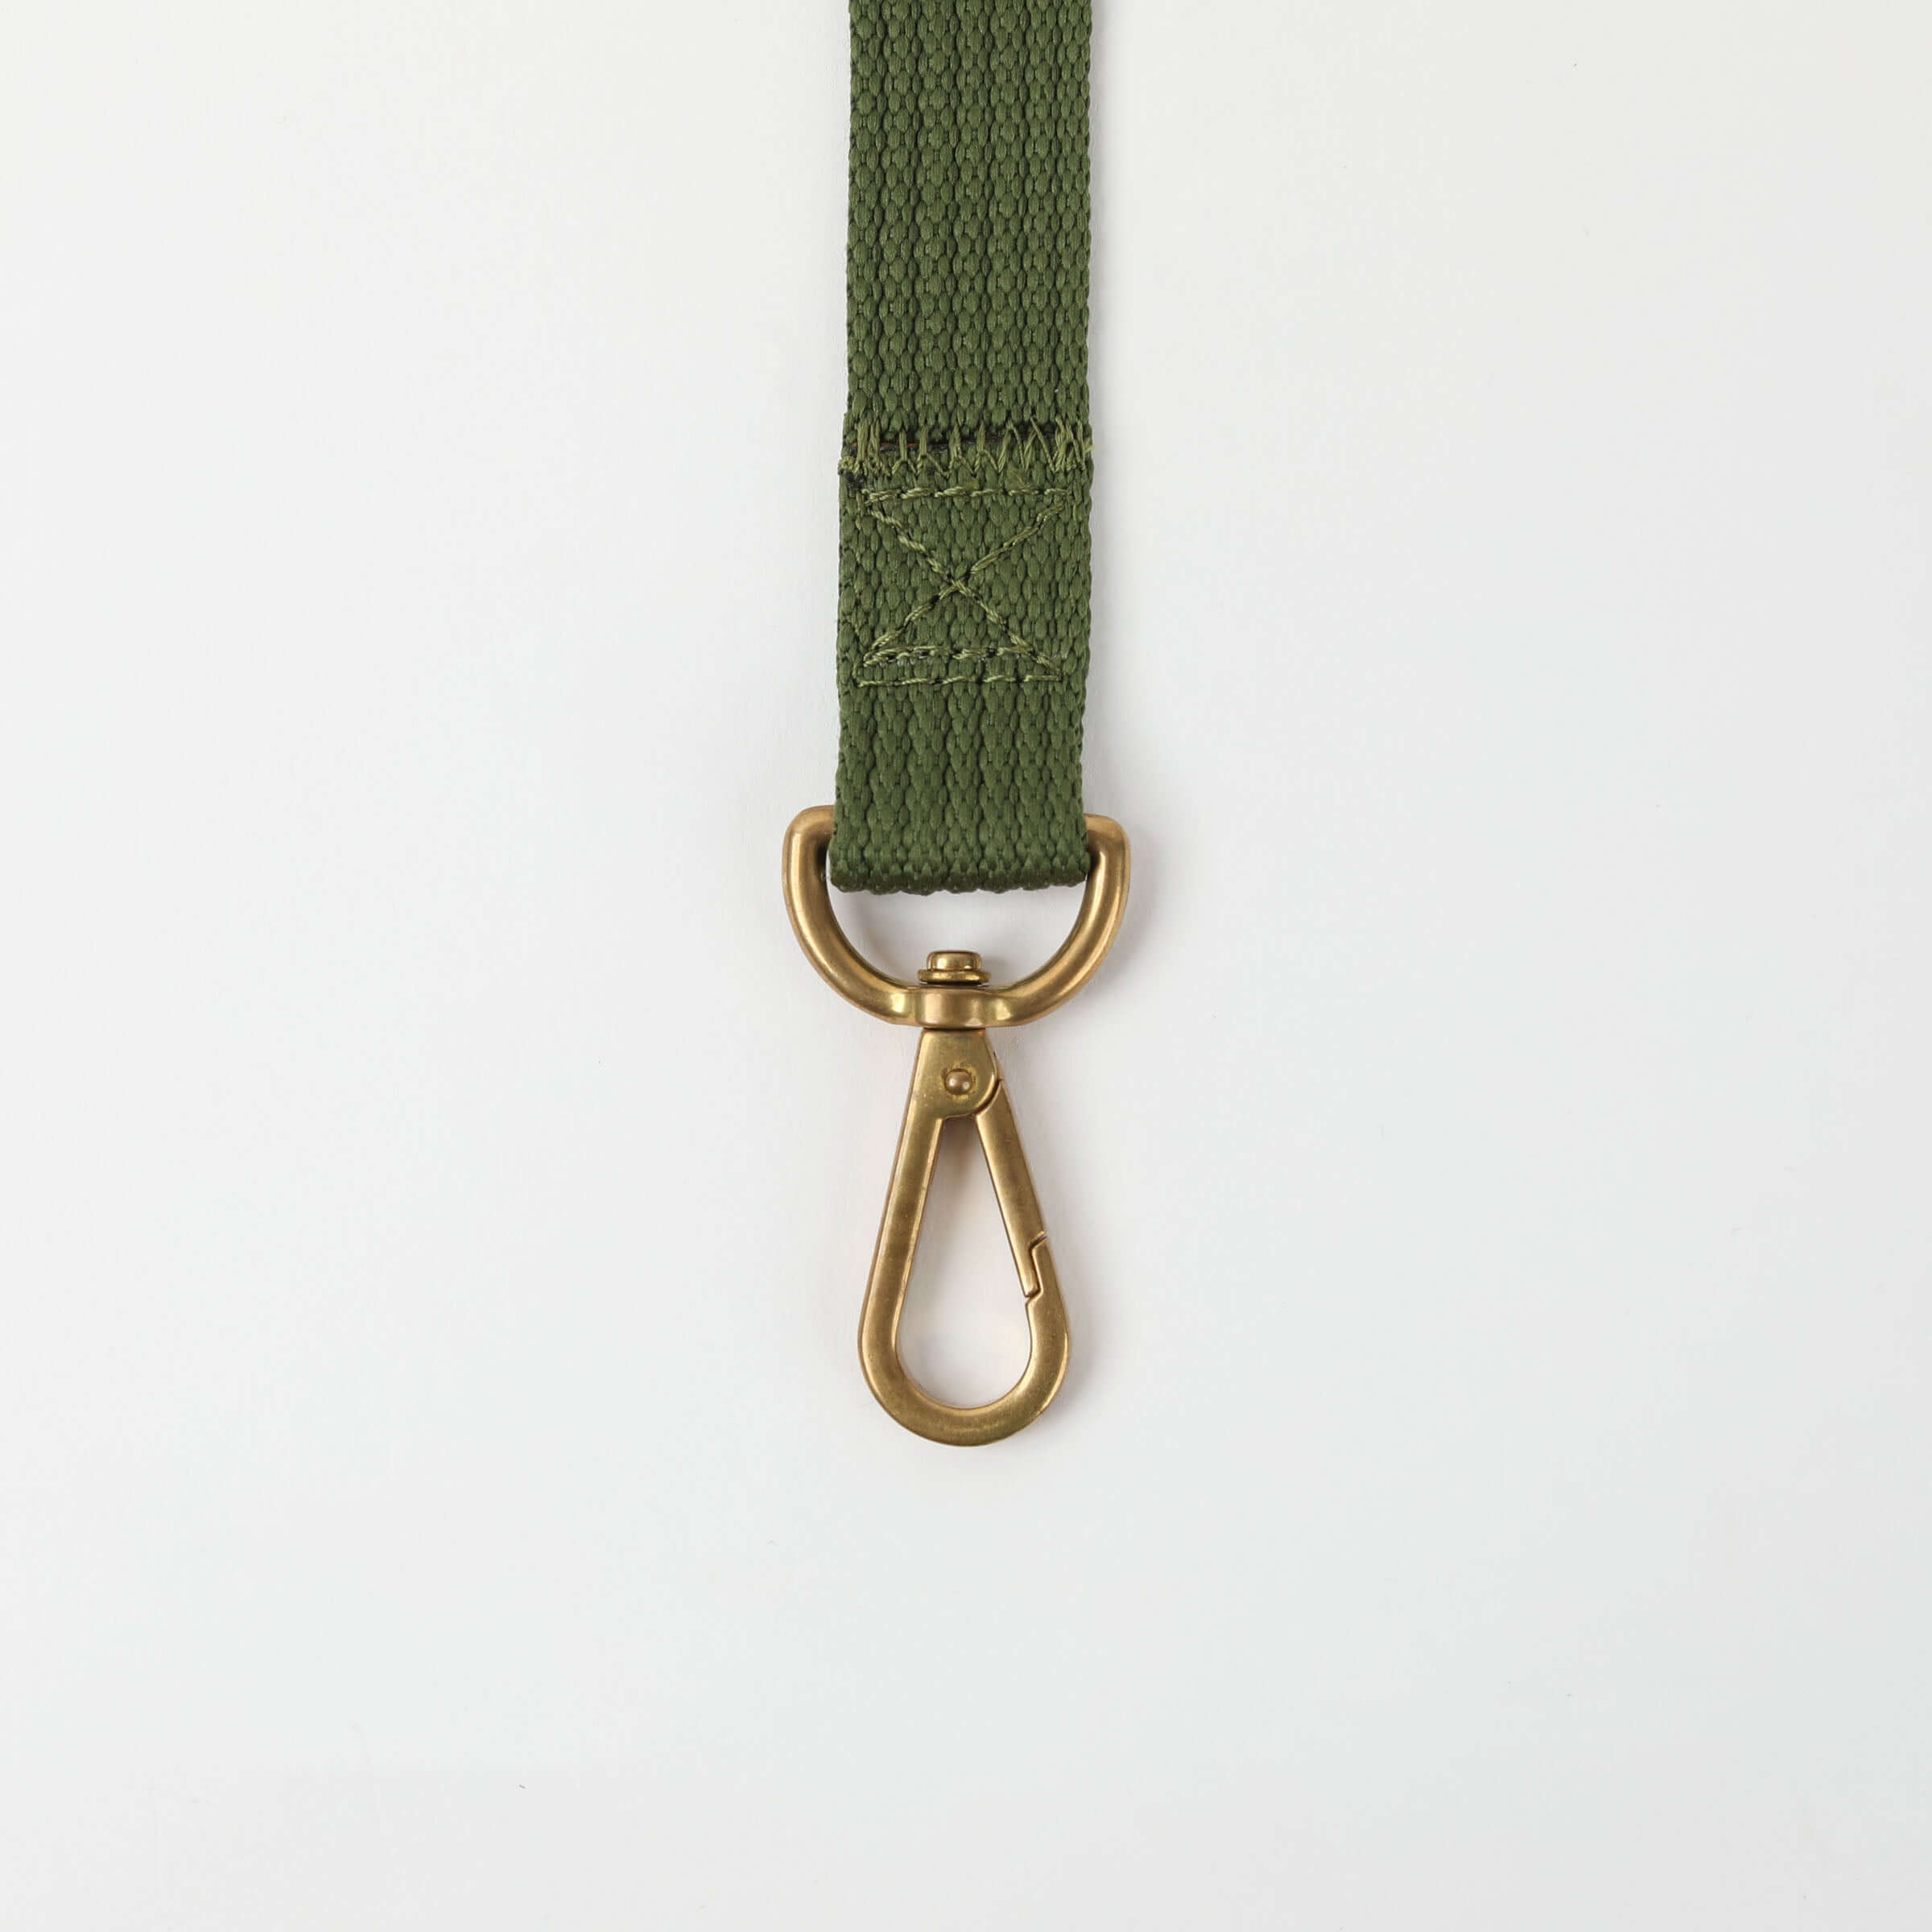 The clip end of a Green Waterproof dog leash made from 100% recycled ocean plastic